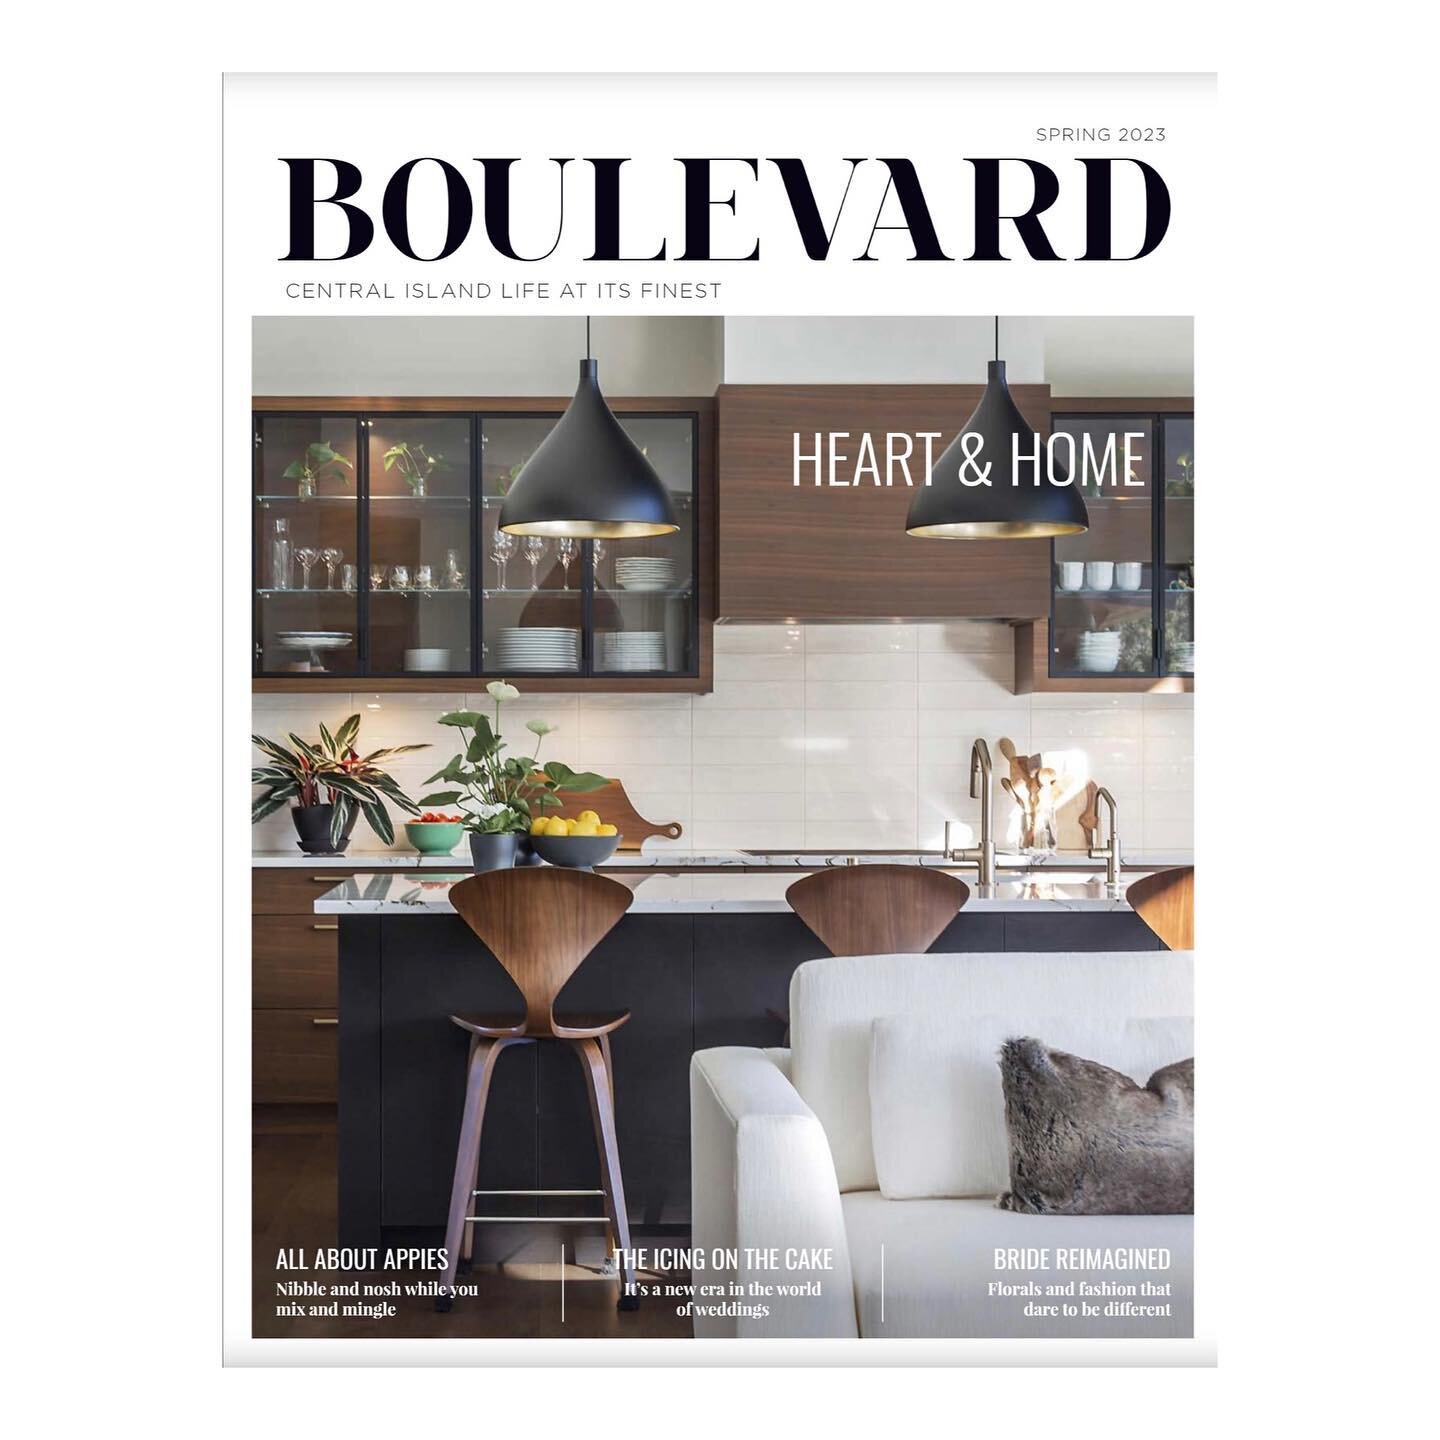 Nice front page and feature in mid Island @boulevard_magazine for spring! :)
.
.
.
.
.
.
#photography #interiordesign #architecture #archtecturephotography #design #interiorphotography #vanisle #yyj #vancouverisland #bc #bcdesign #customhomes #custom